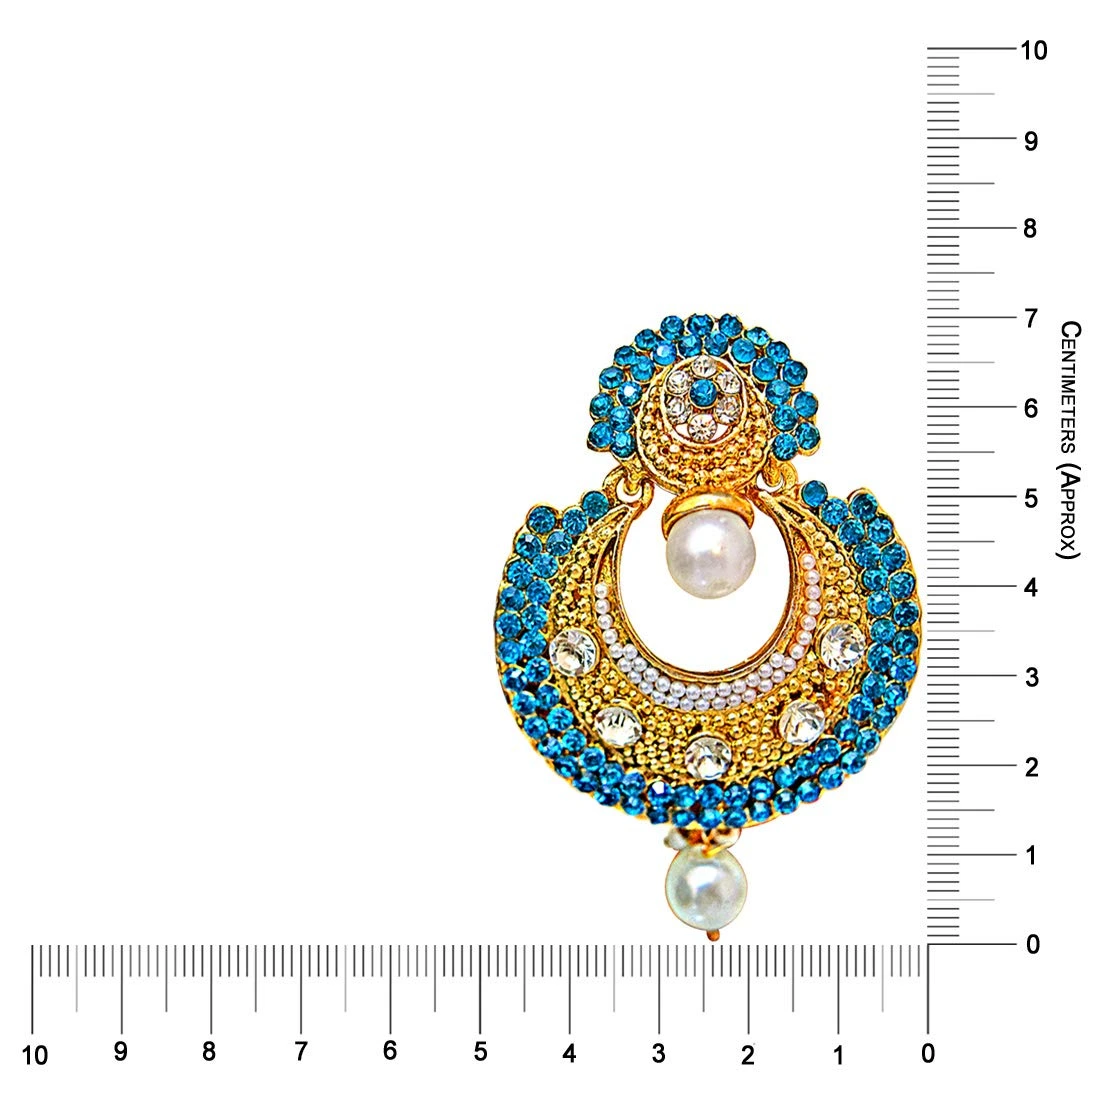 Traditional Round Shaped Blue & White Stone & Gold Plated Dangling Fashion Earrings for Women (PSE9)